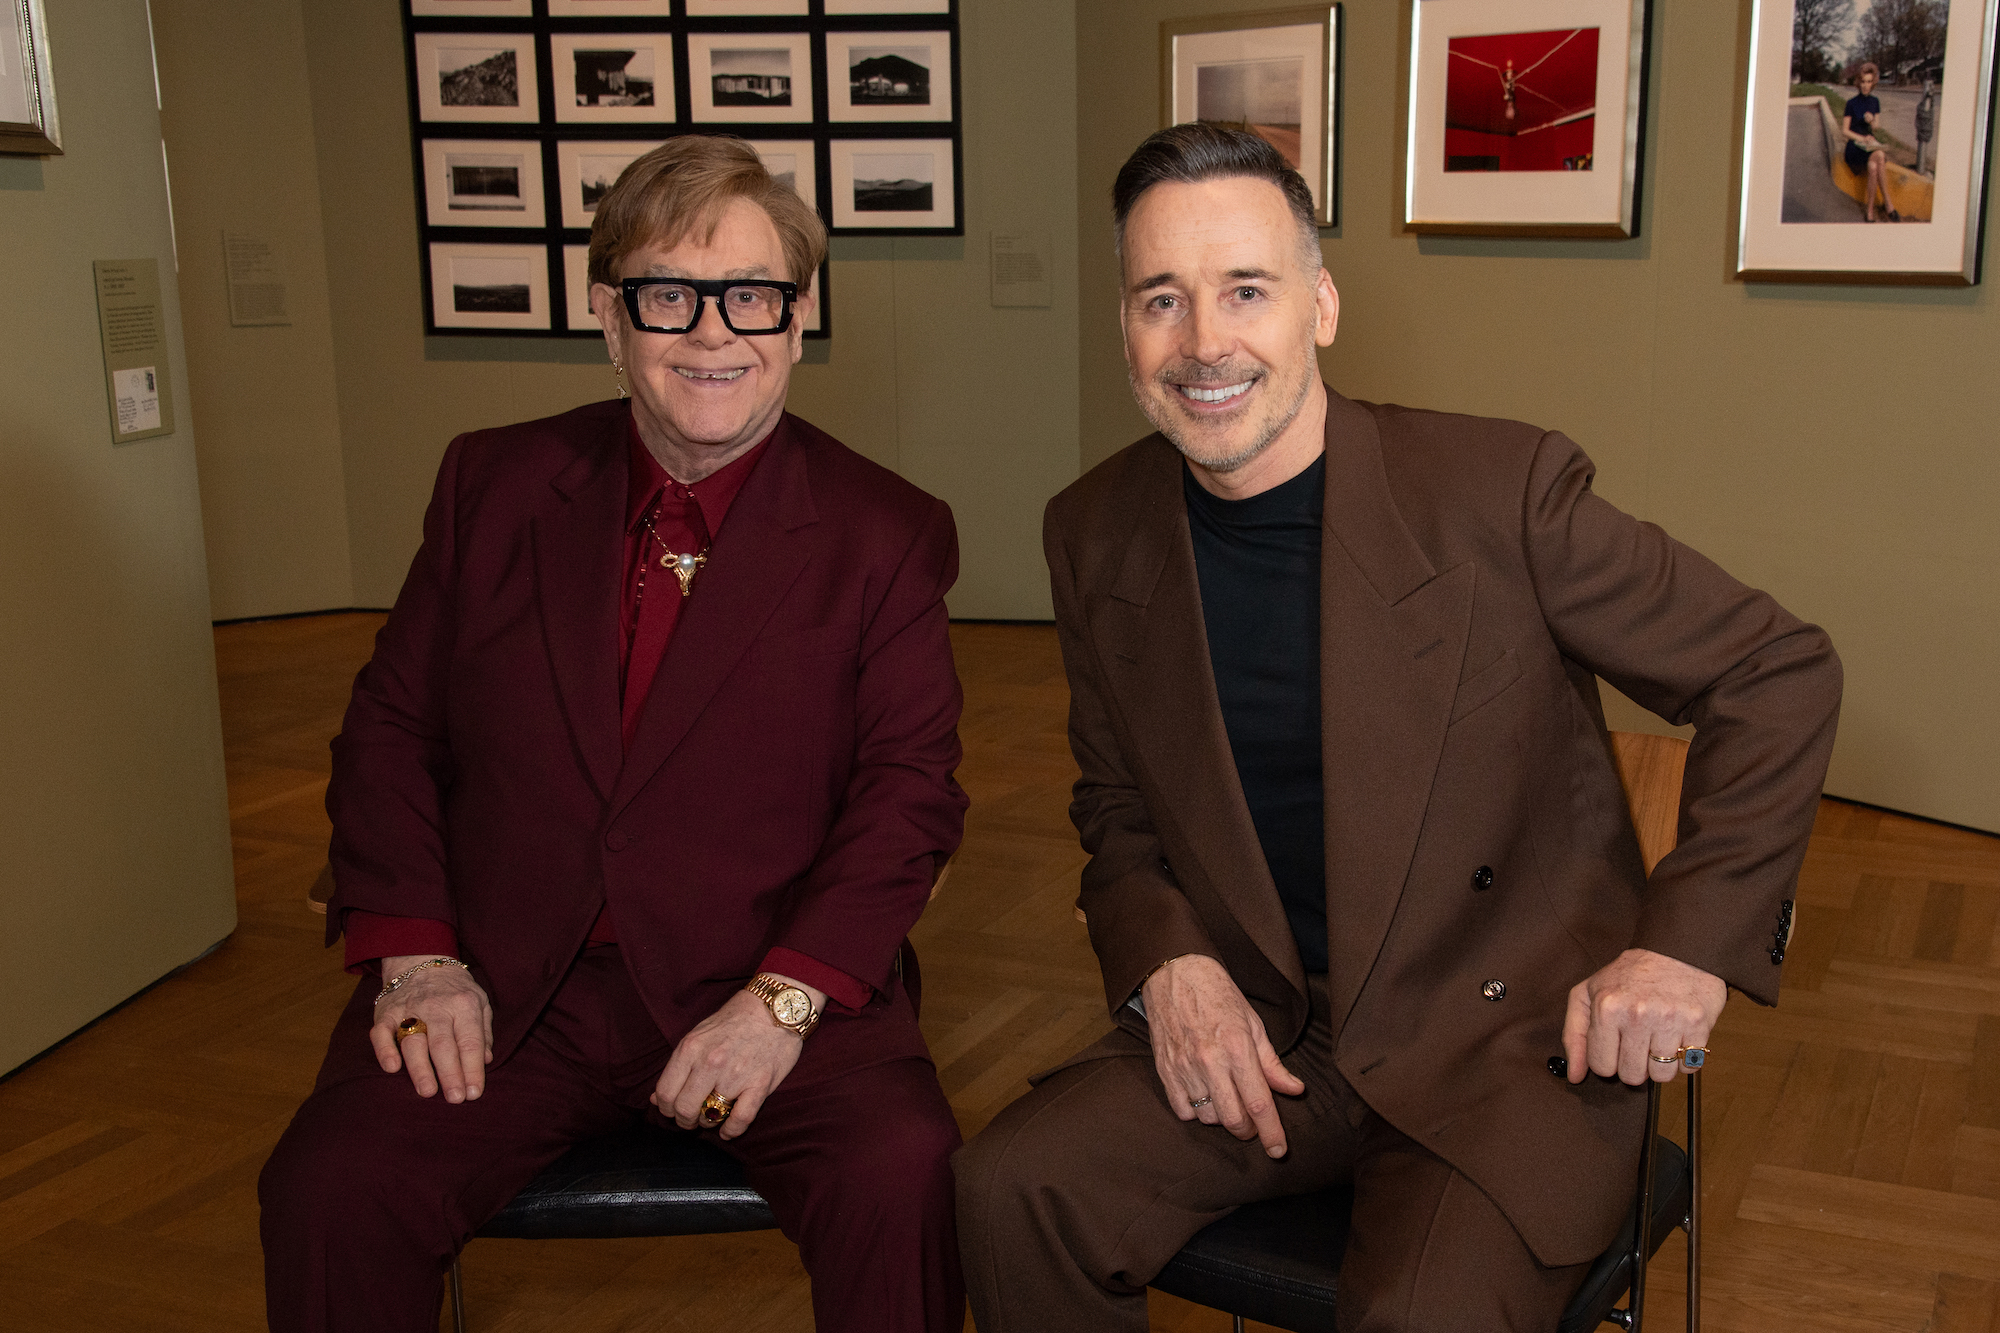 Elton John and David Furnish Shine in Gucci at Fragile Beauty Exhibition Opening in London